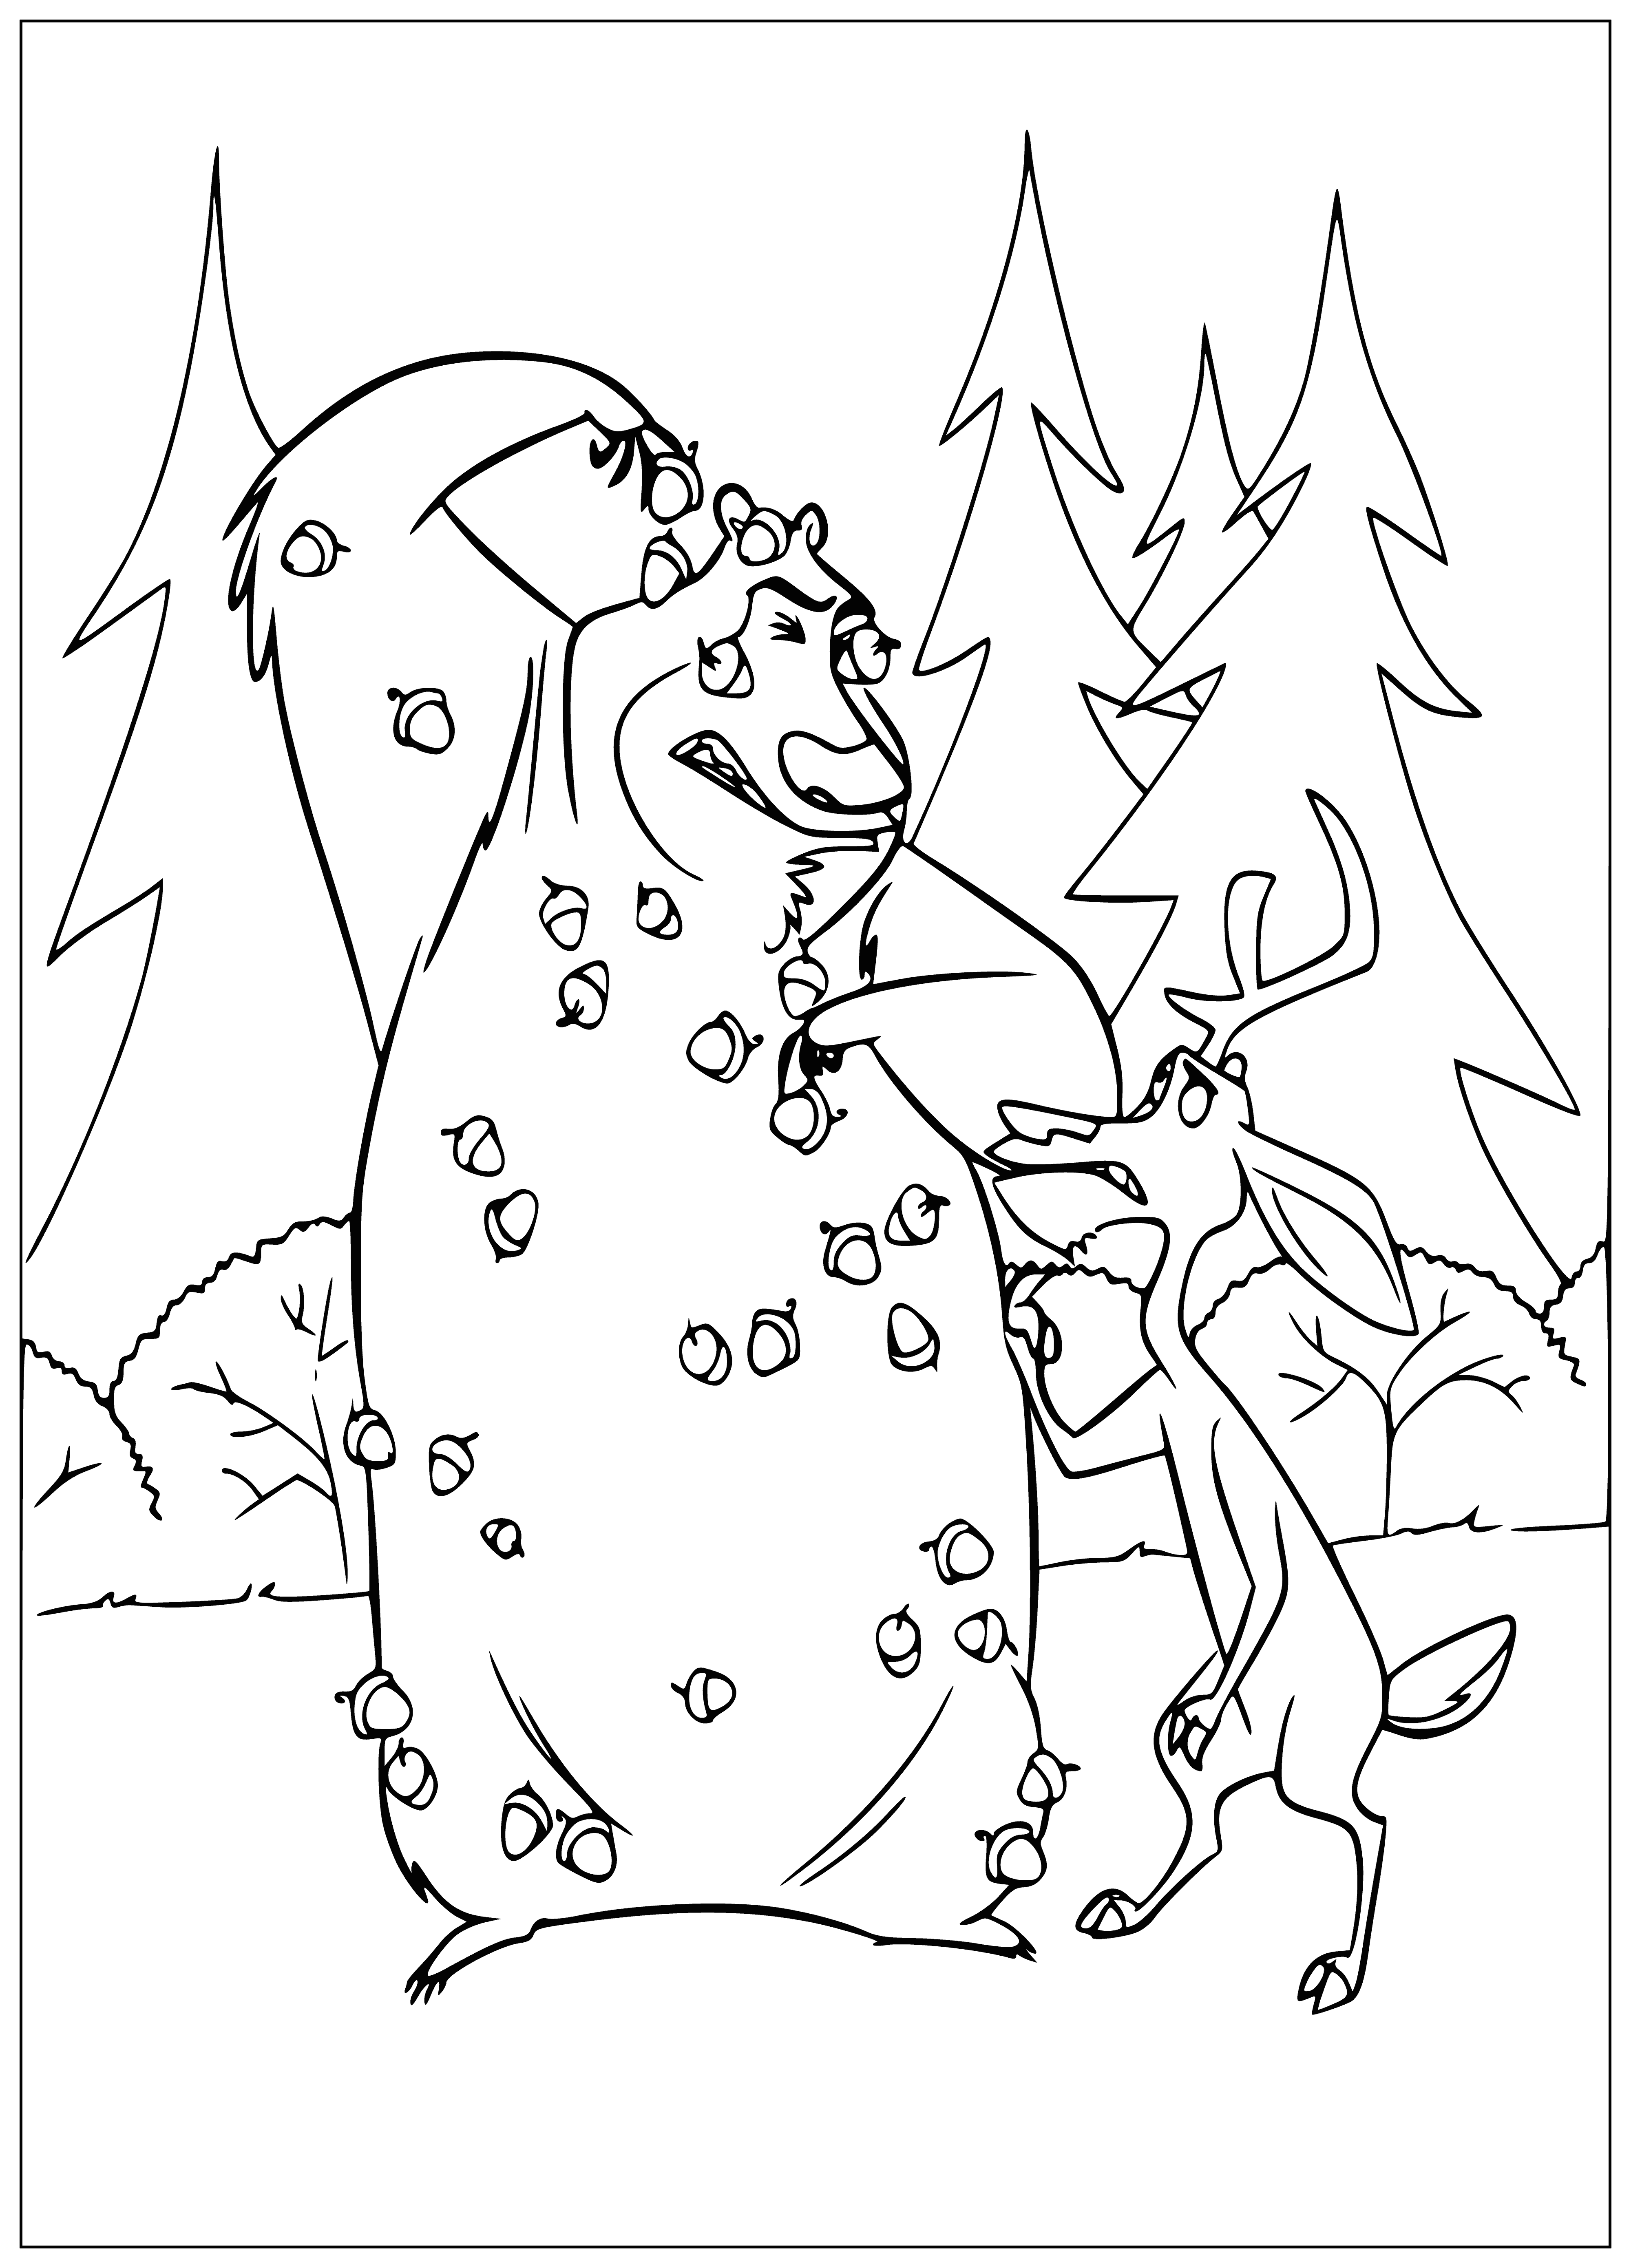 Boog and Elliot coloring page